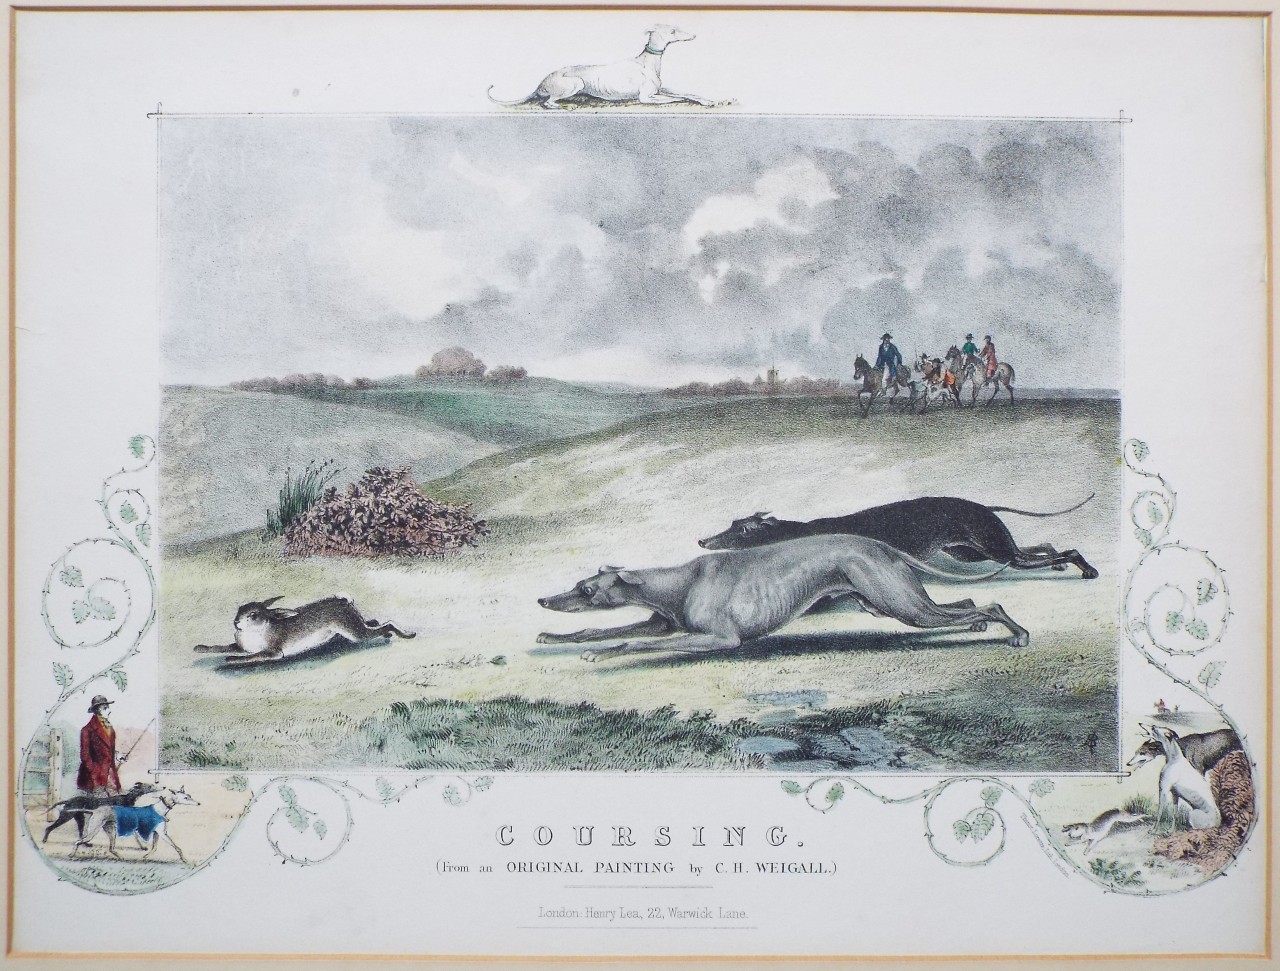 Lithograph - Coursing. (From an Original Painting by C. H. Weigall.)